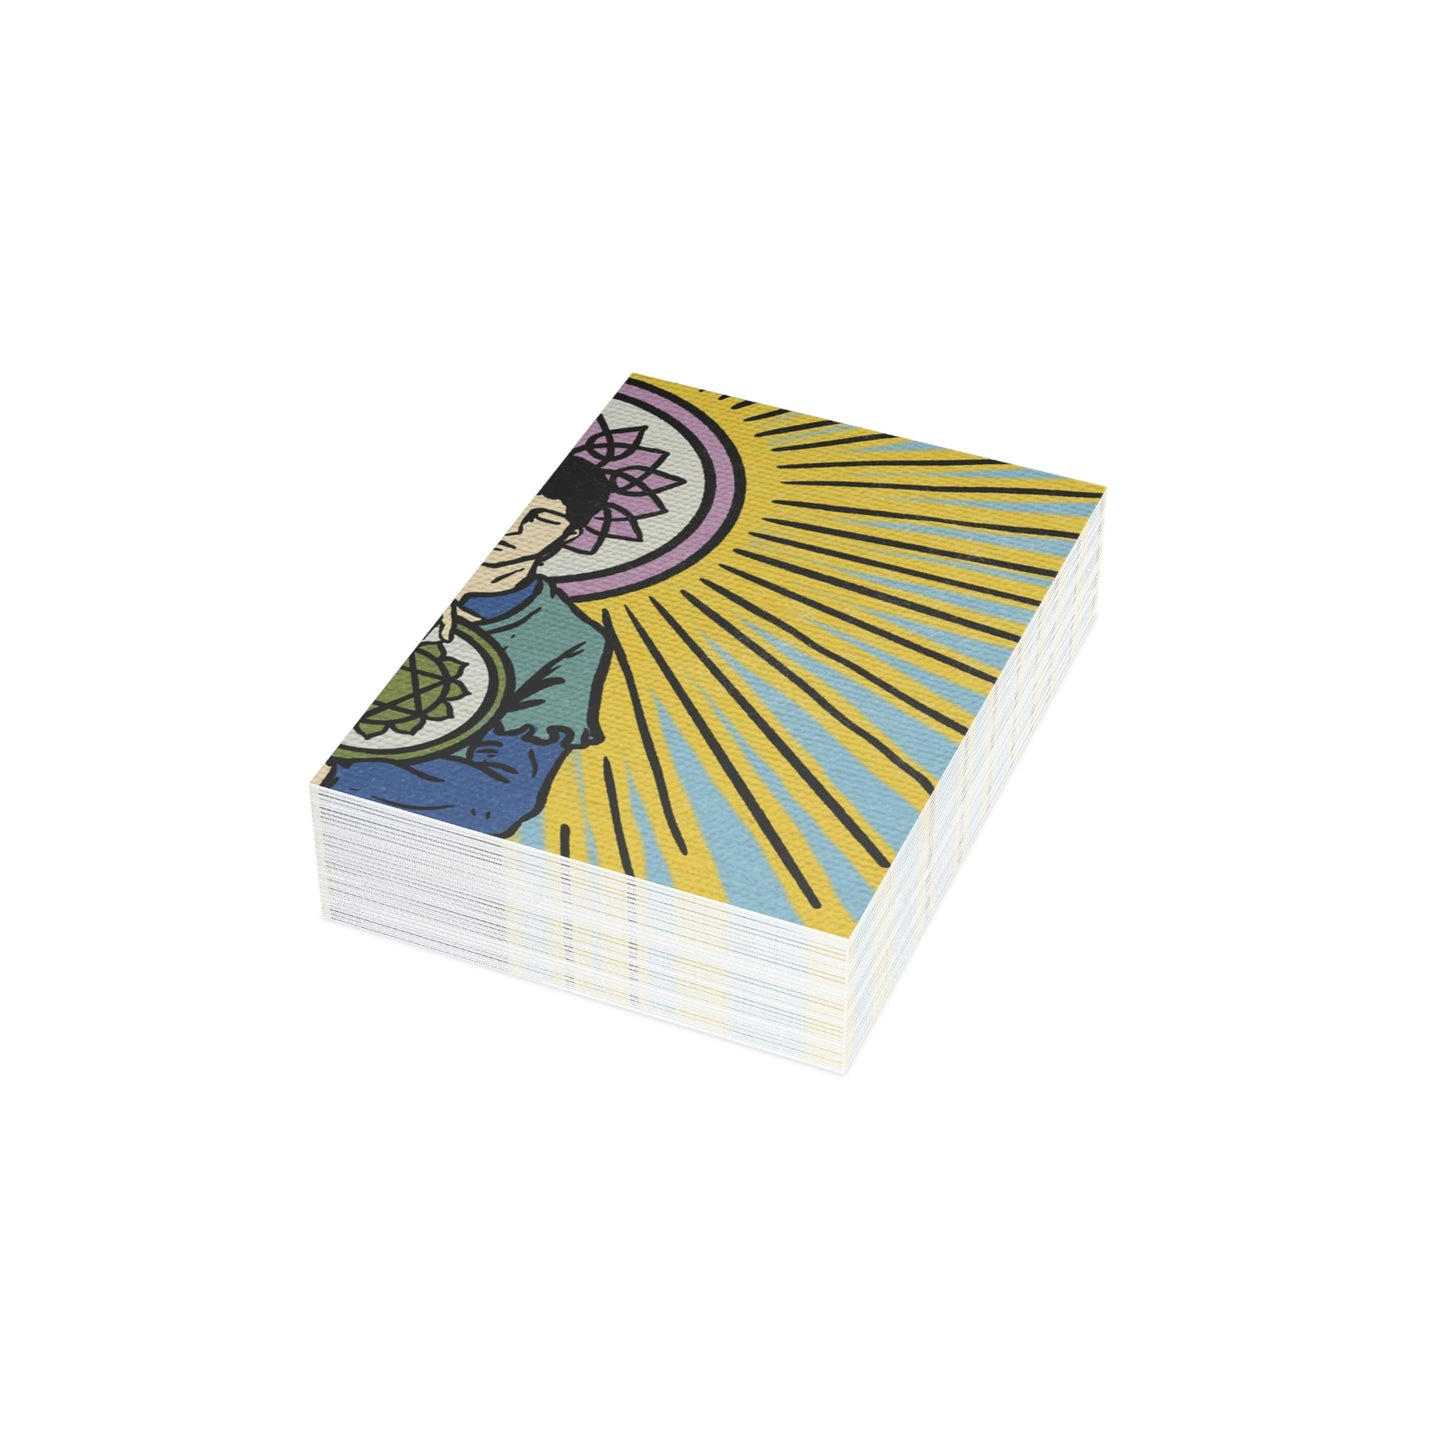 'Four of Pentacles' Chakra Greeting Cards (1, 10, 30, and 50pcs)